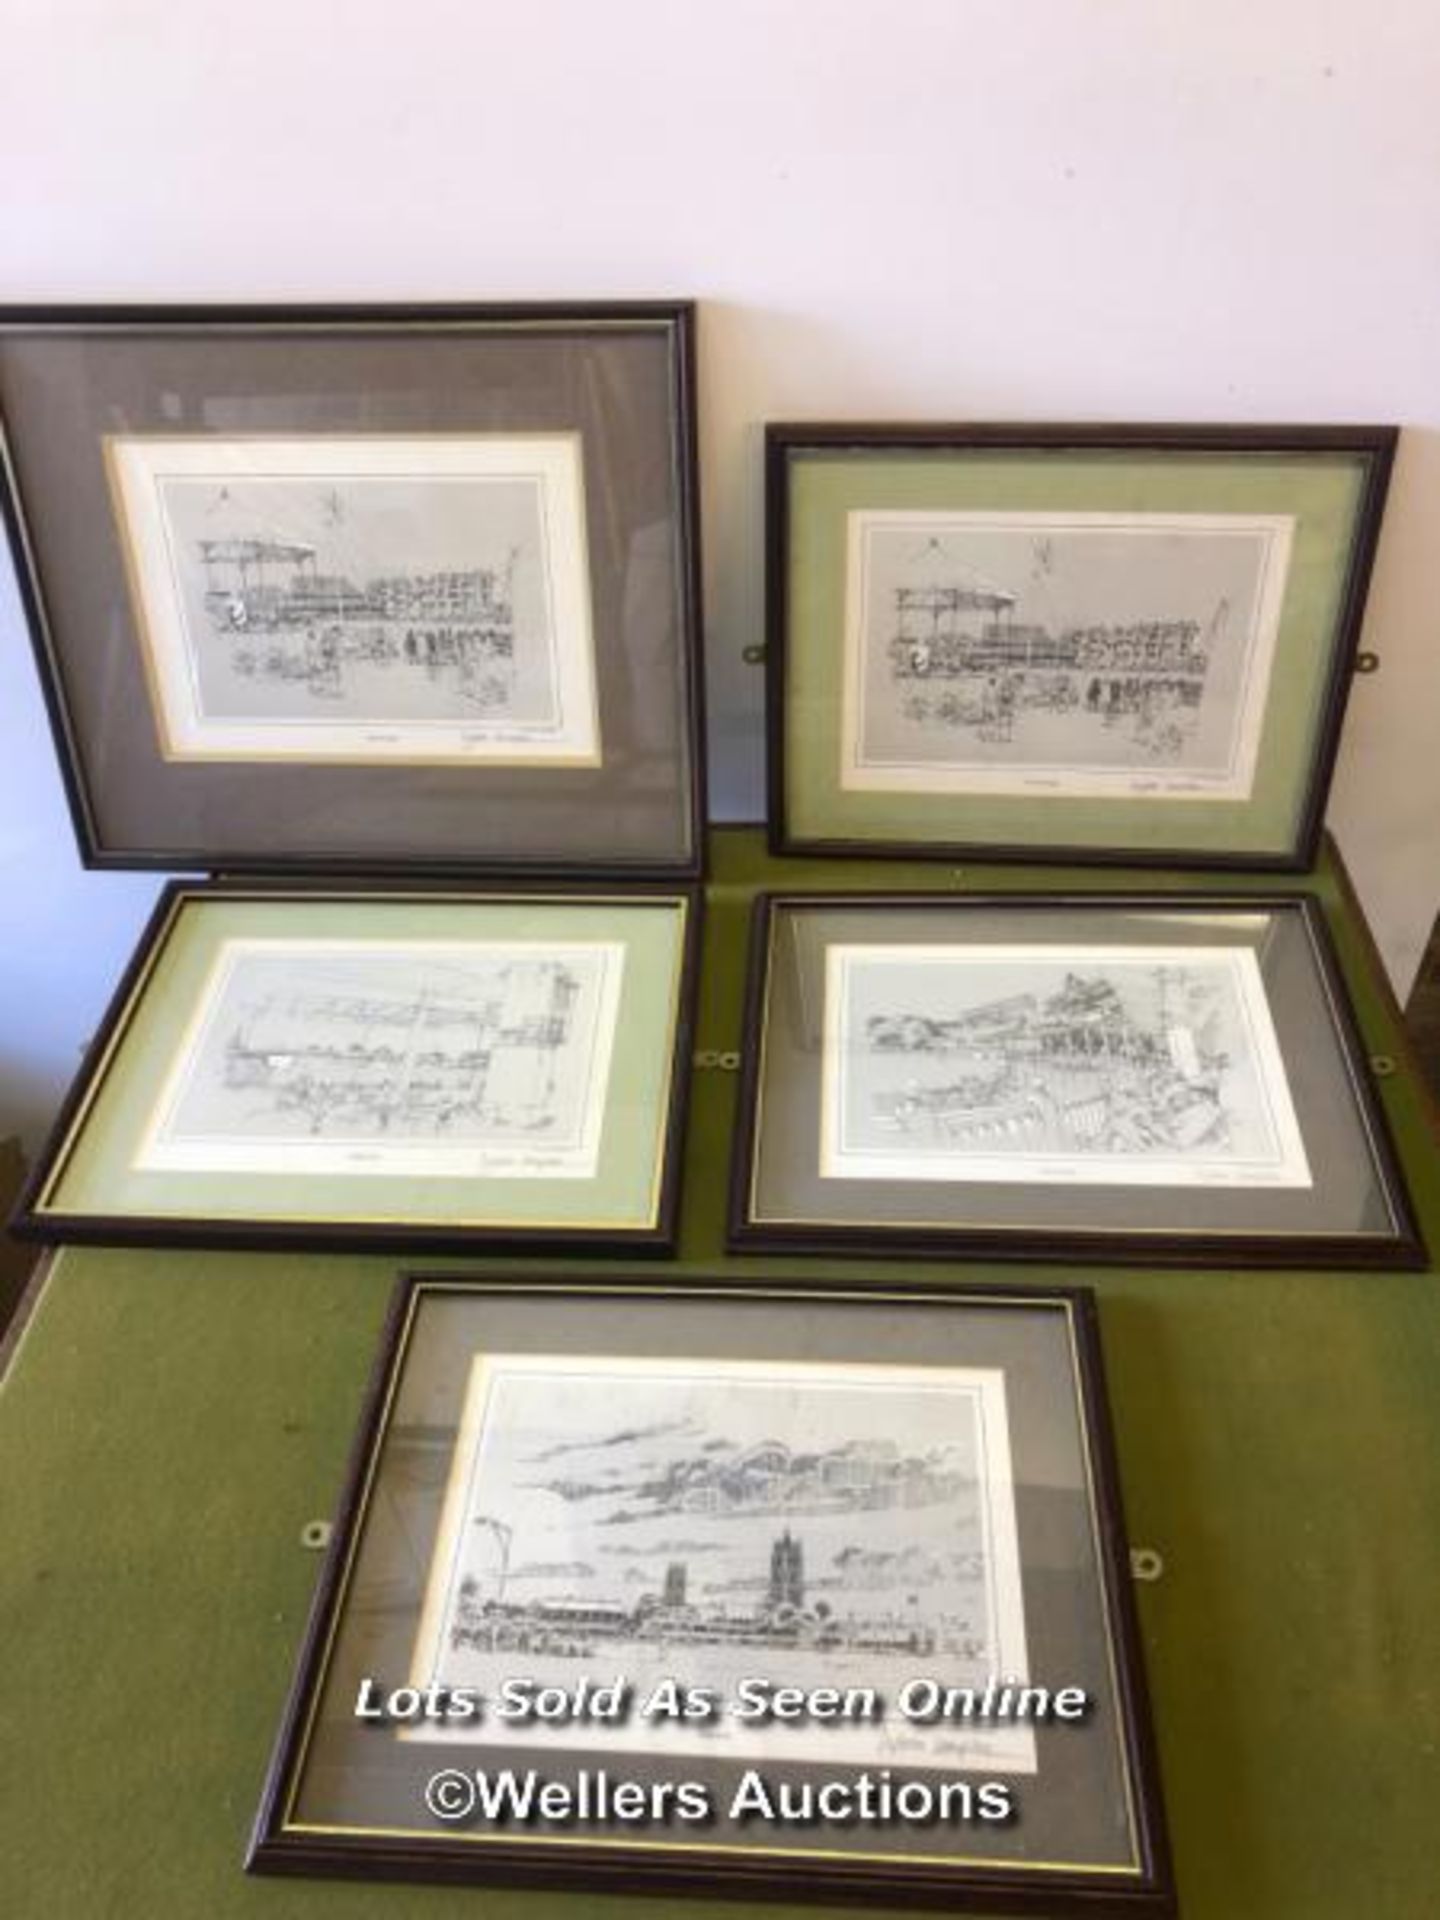 FIVE FRAMED AND GLAZED PRINTS OF CRICKET GROUNDS, INCLUDING TAUNTON, SCARBOROUGH, CANTERBURY AND